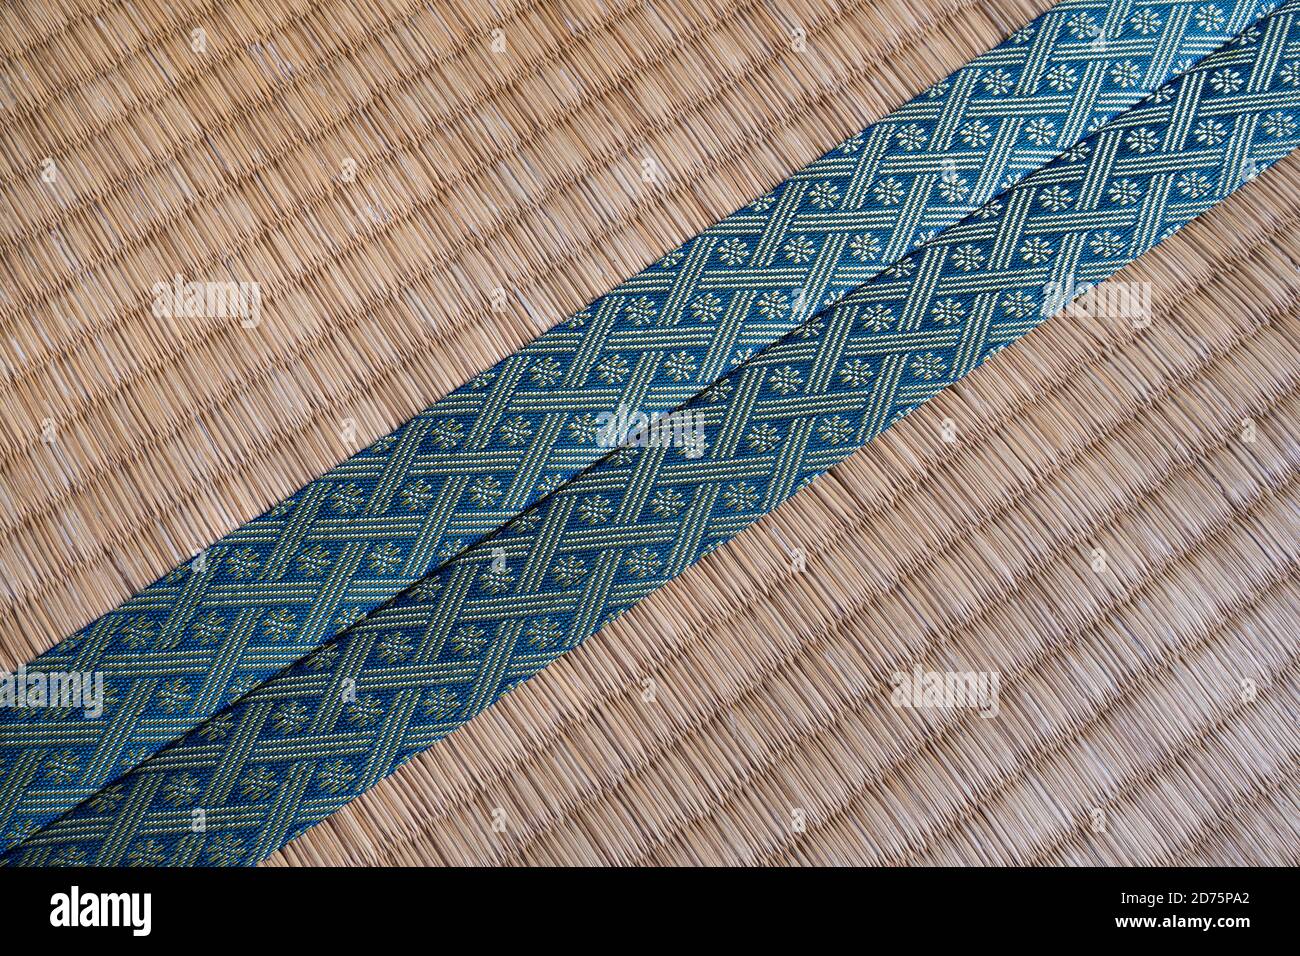 Japanese traditional tatami floors, made from rice straws. Close up shot. Stock Photo